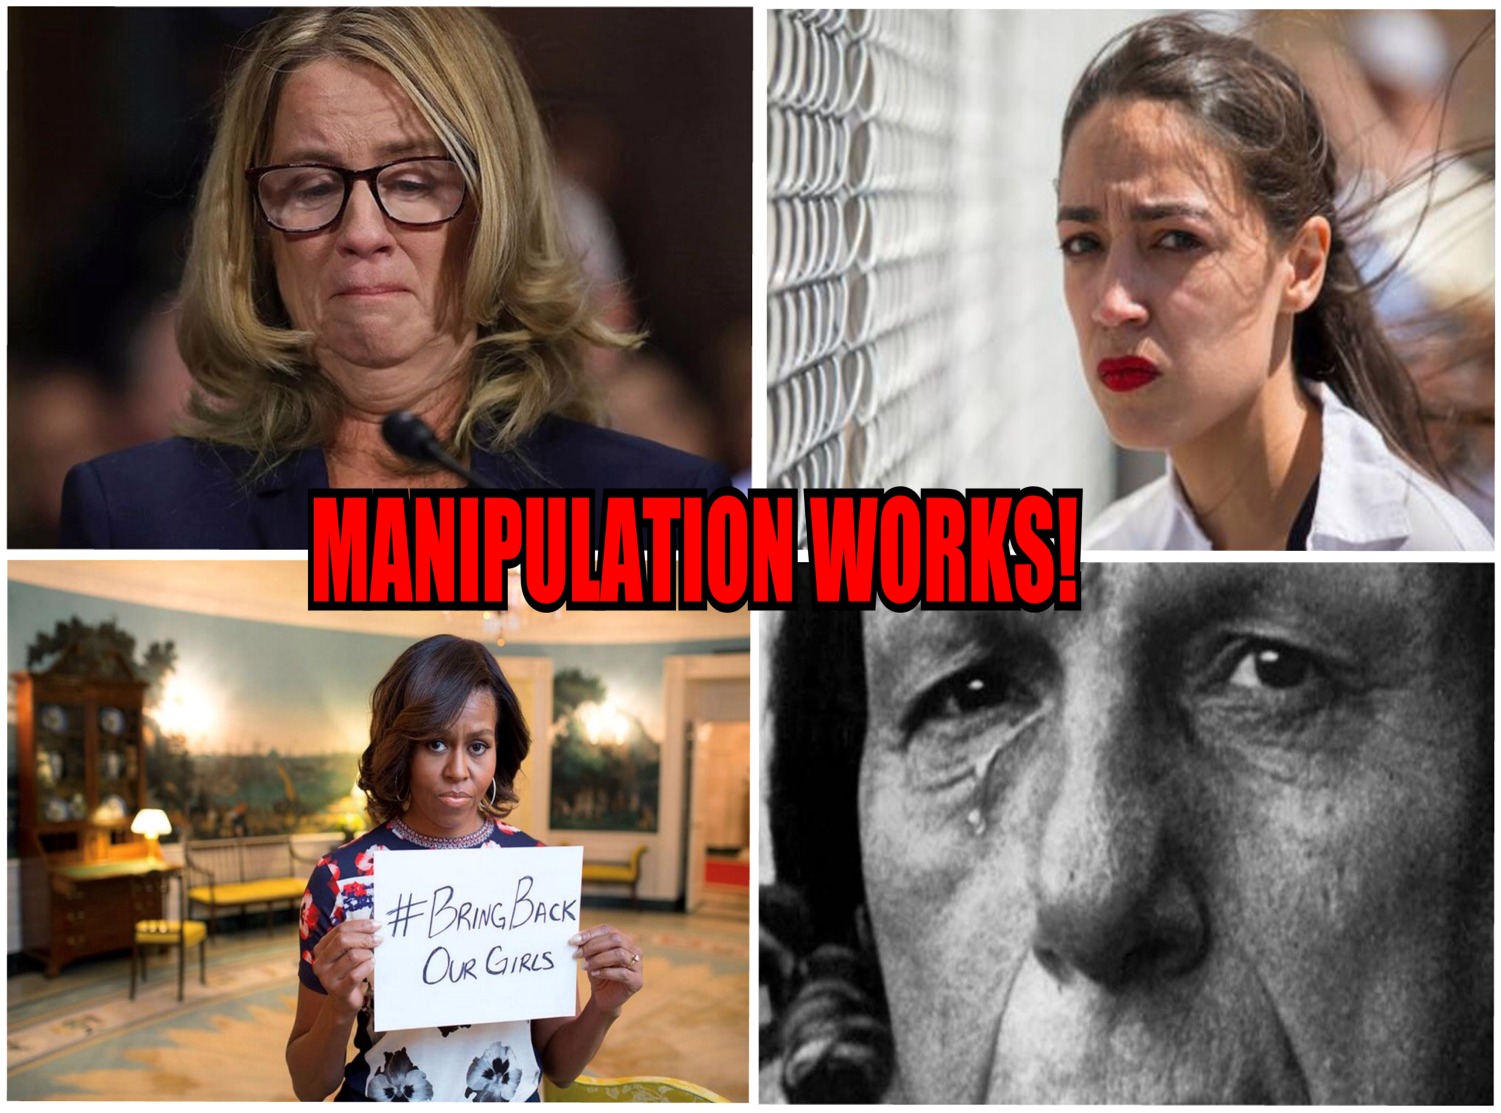 facial expression - Manipulation Works! Back Our Girls